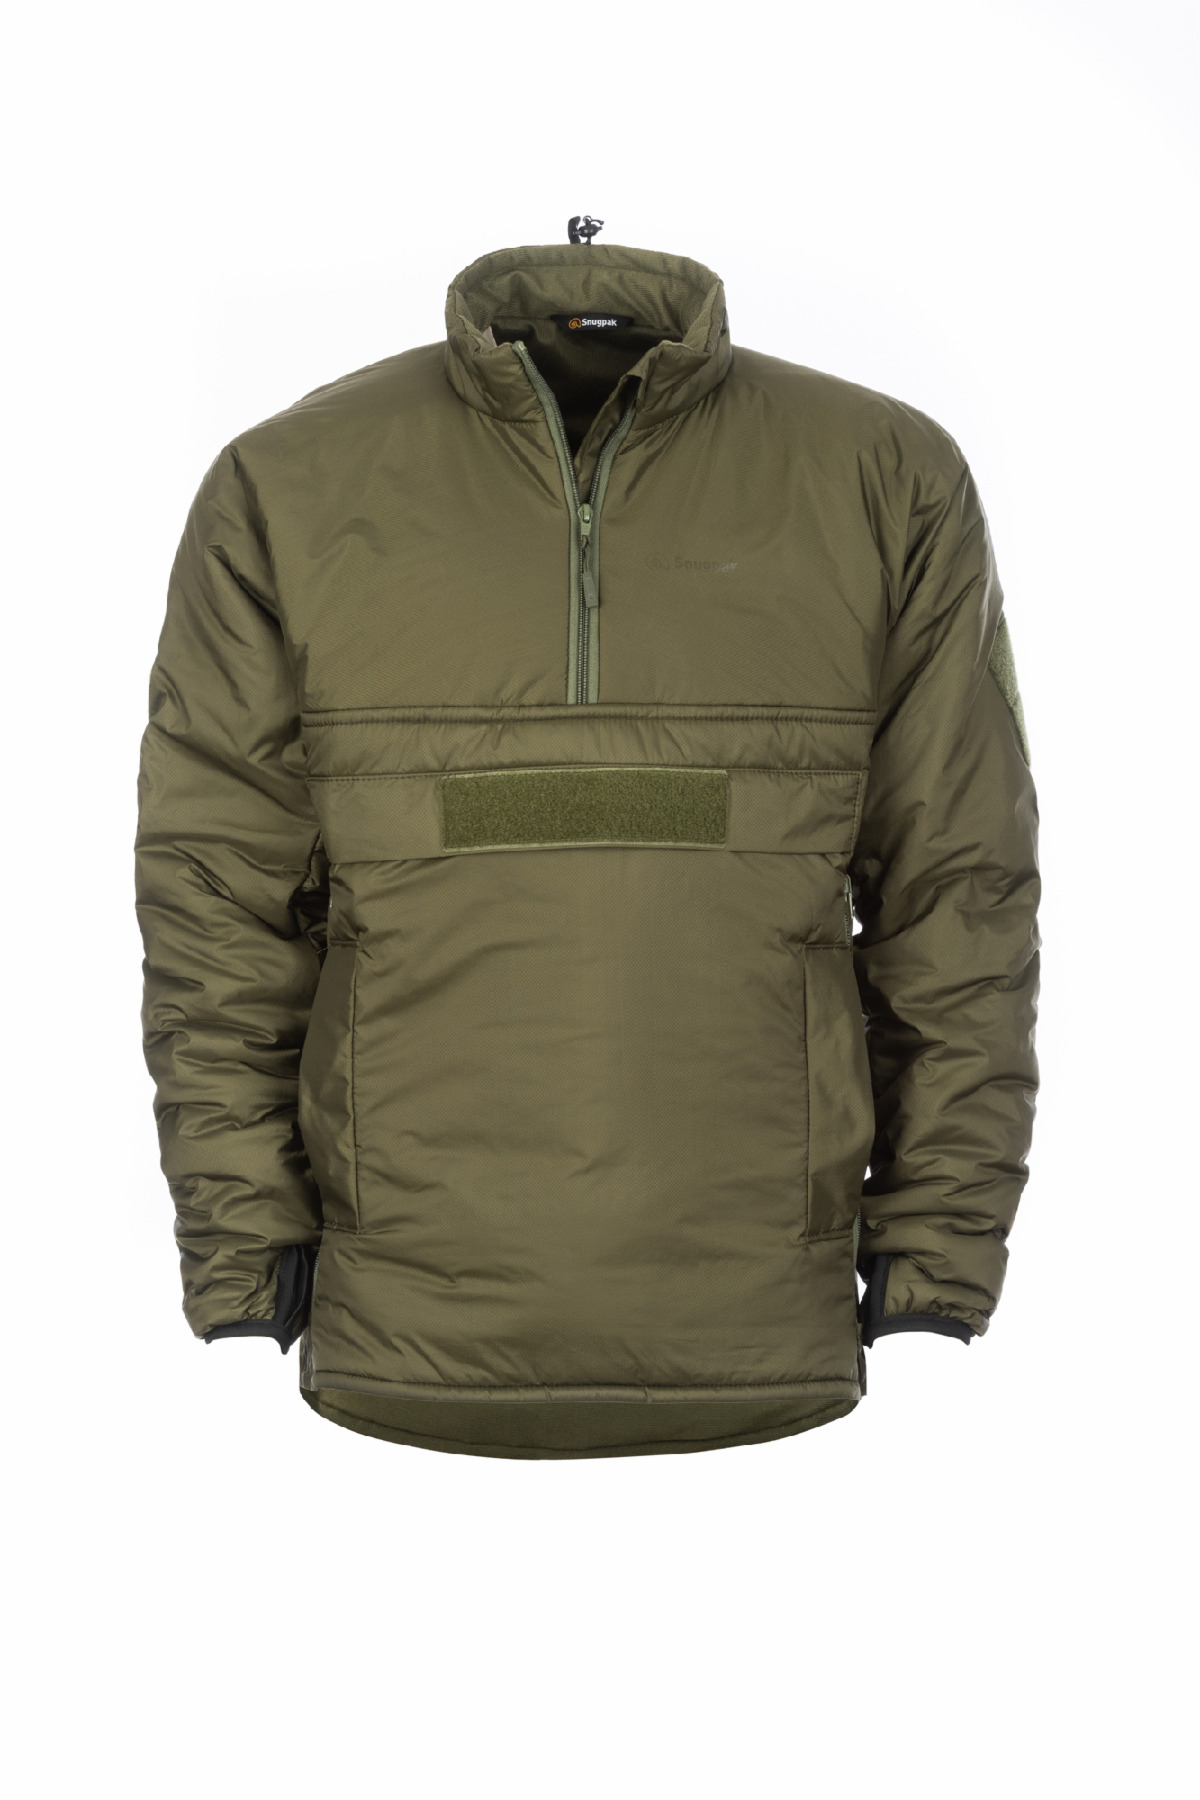 Snugpak® Introduces Two New Jackets at 2024 SHOT Show • Spotter Up